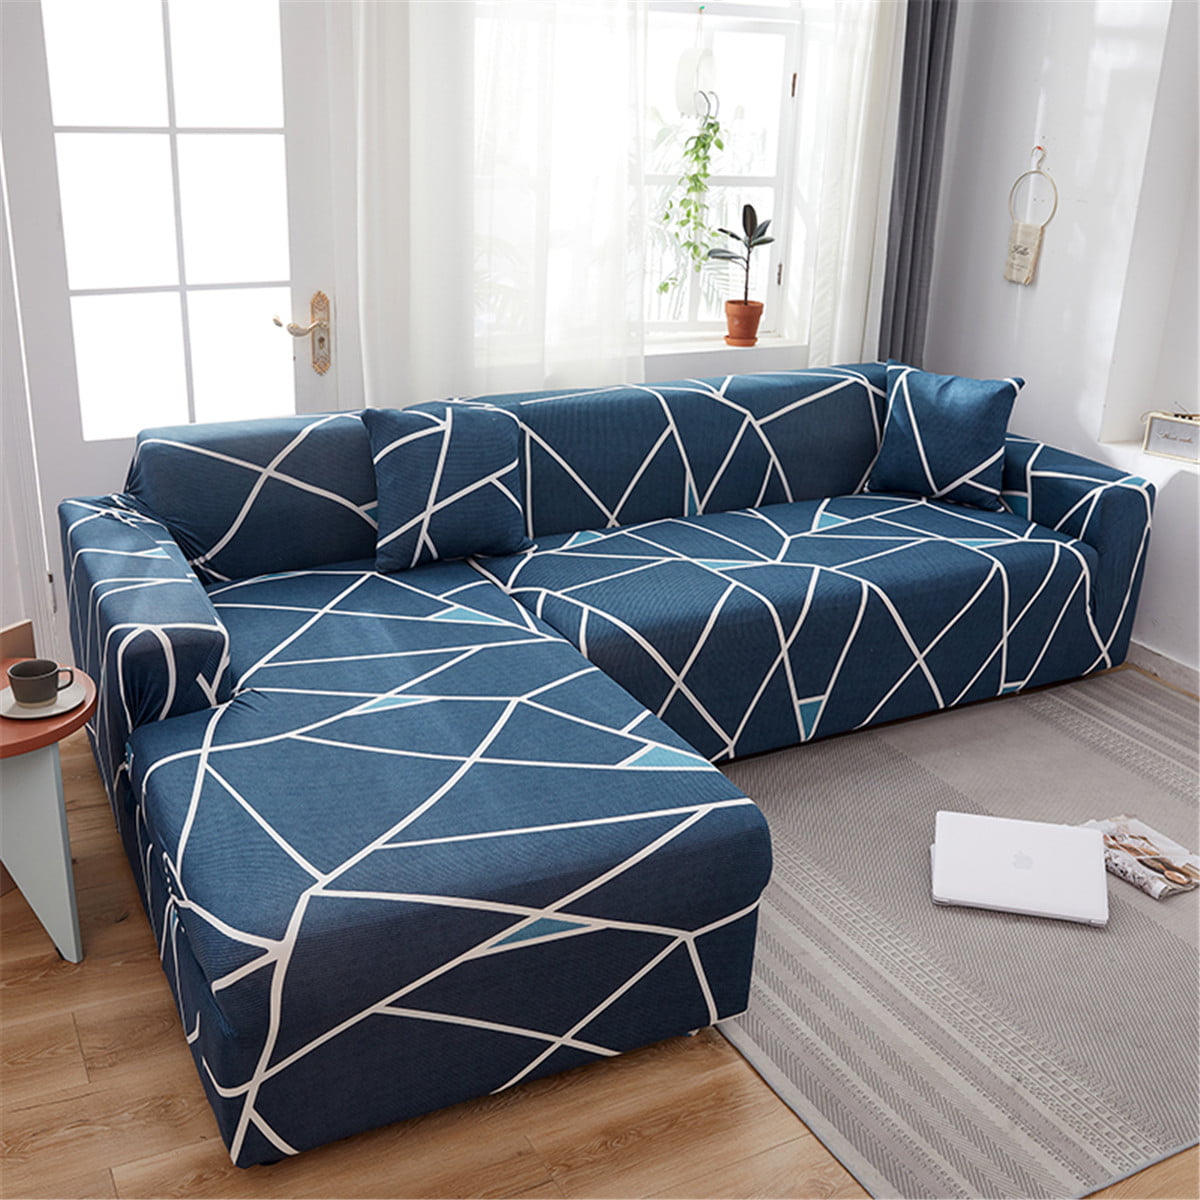 1/2 /3 Seater Sofa Couch Slip Over Easy Fit Stretch Cover Elastic Protector USA 